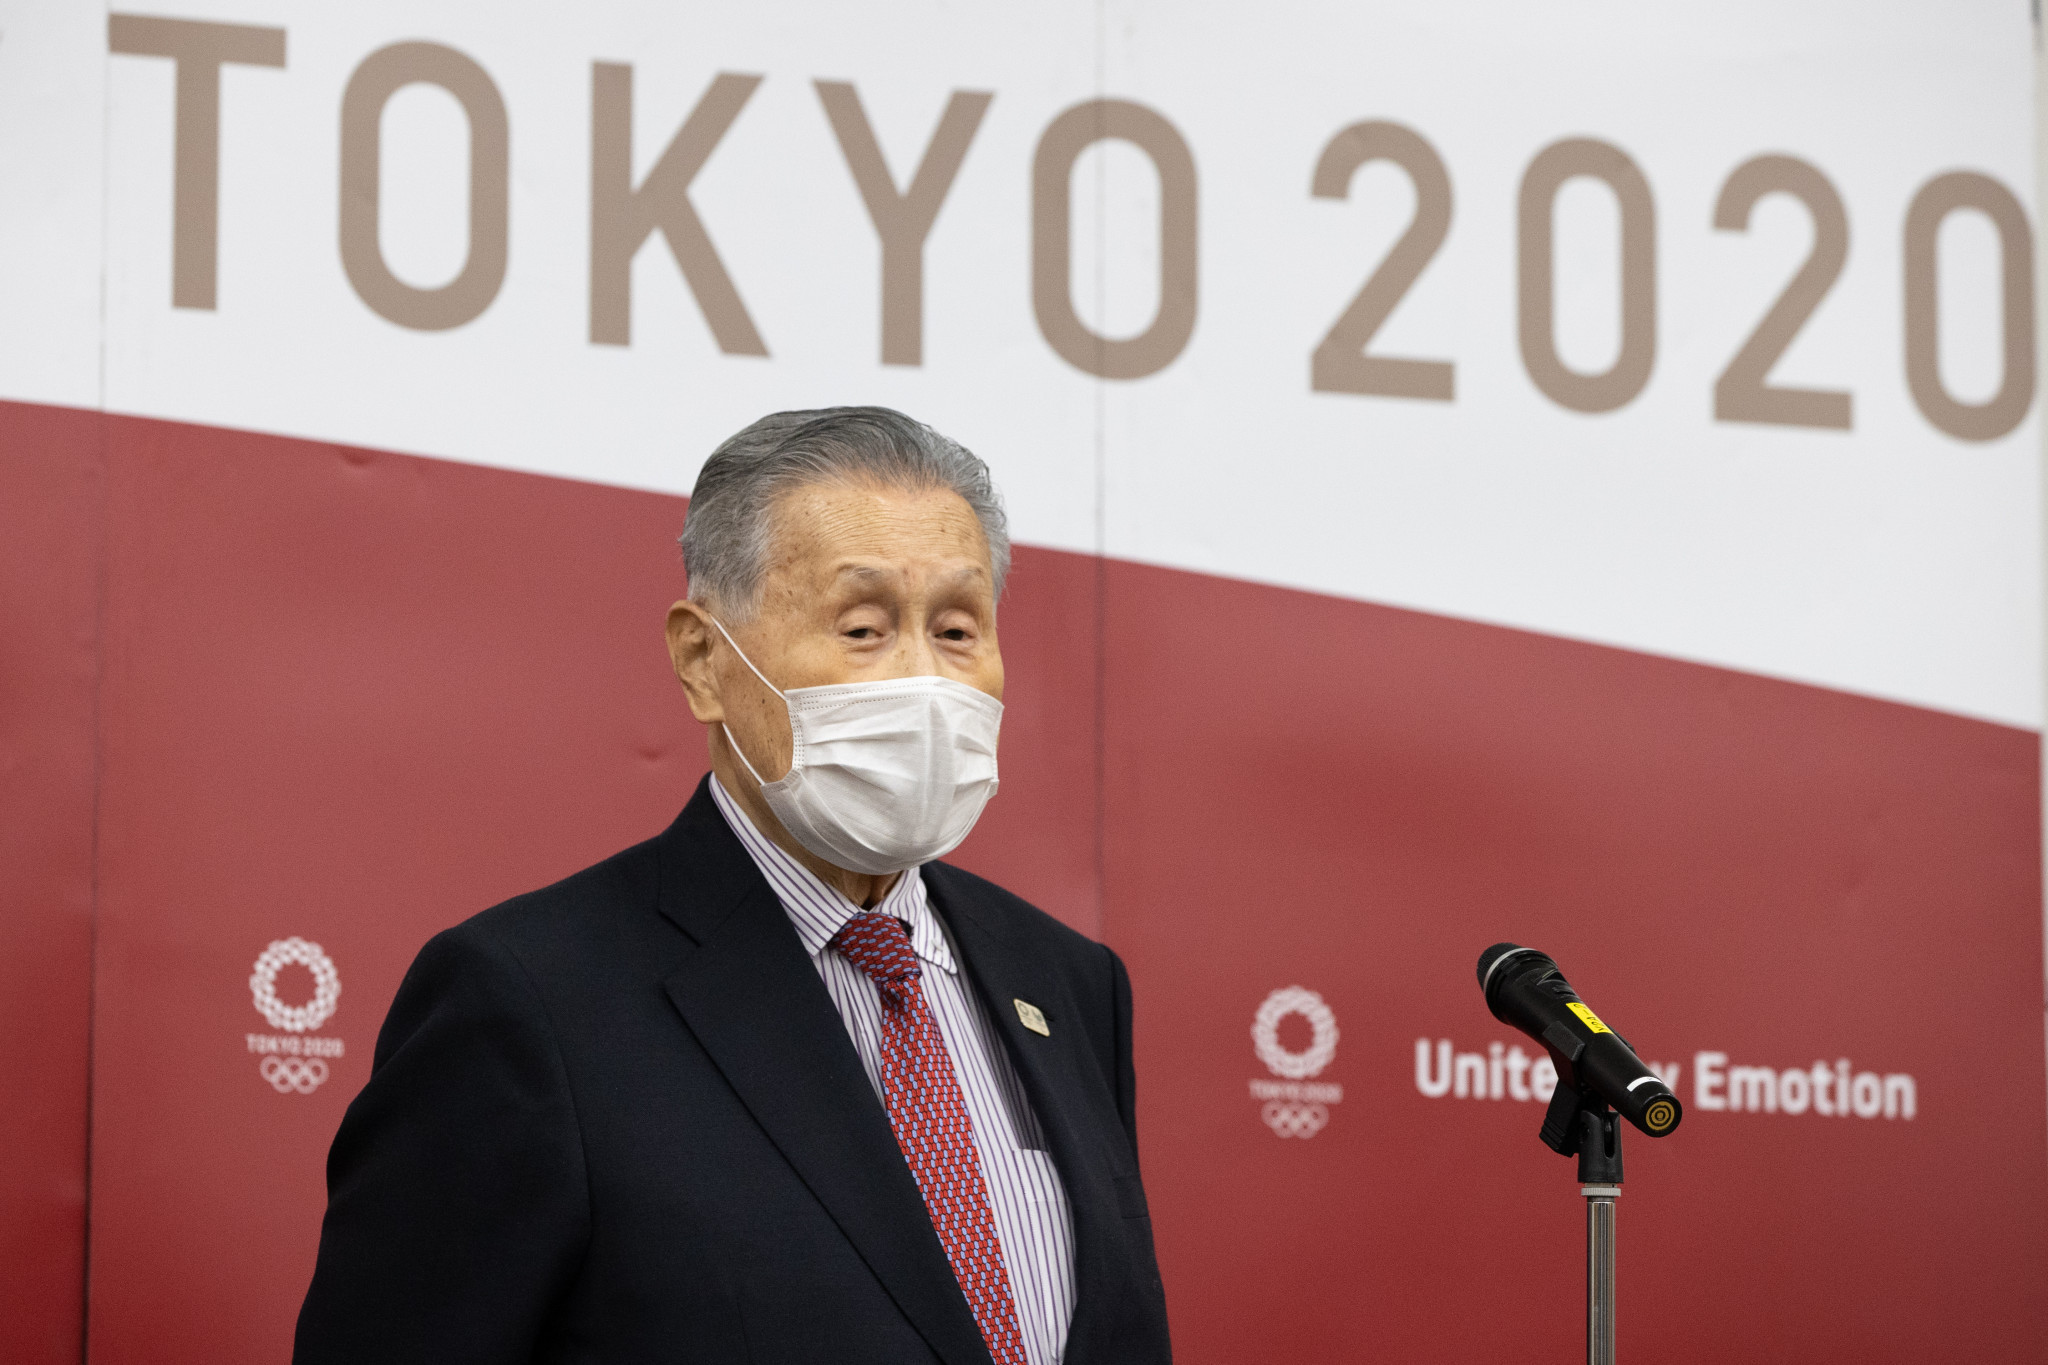 Former Tokyo 2020 President Mori questioned amid deepening corruption scandal